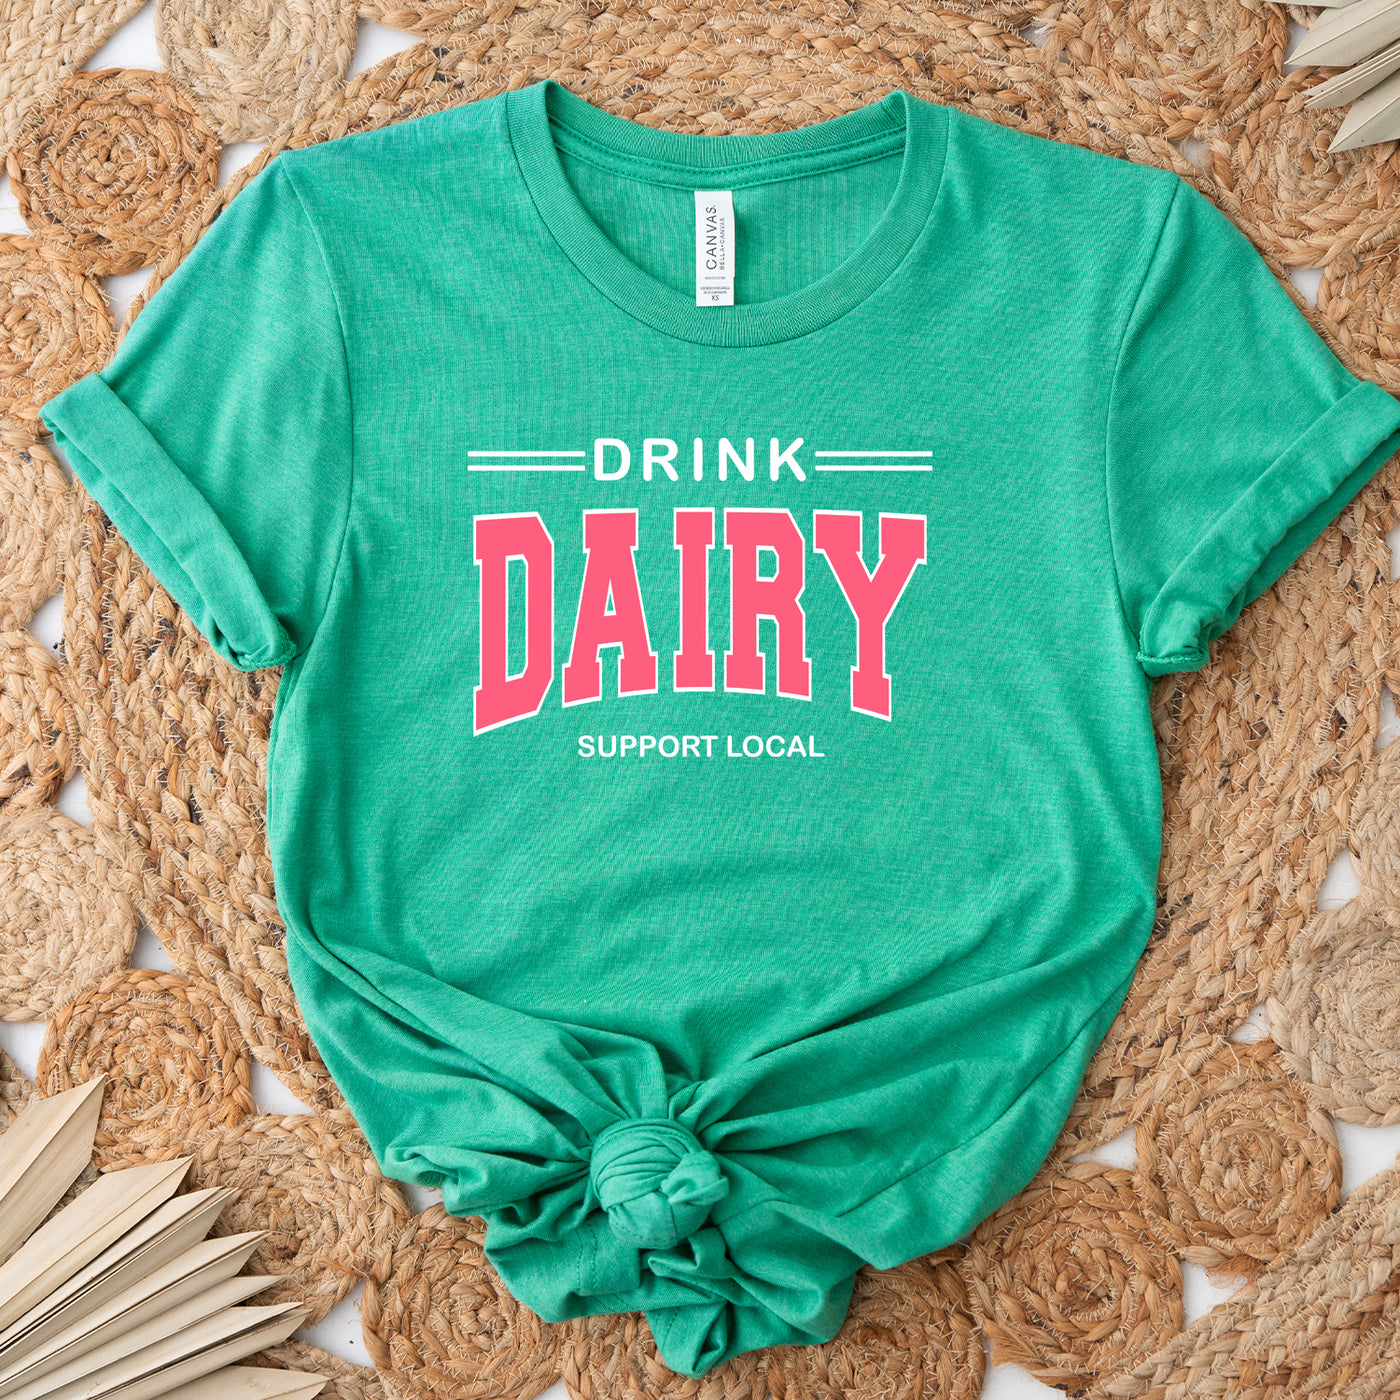 Pink Drink Dairy - Support Local T-Shirt (XS-4XL) - Multiple Colors!